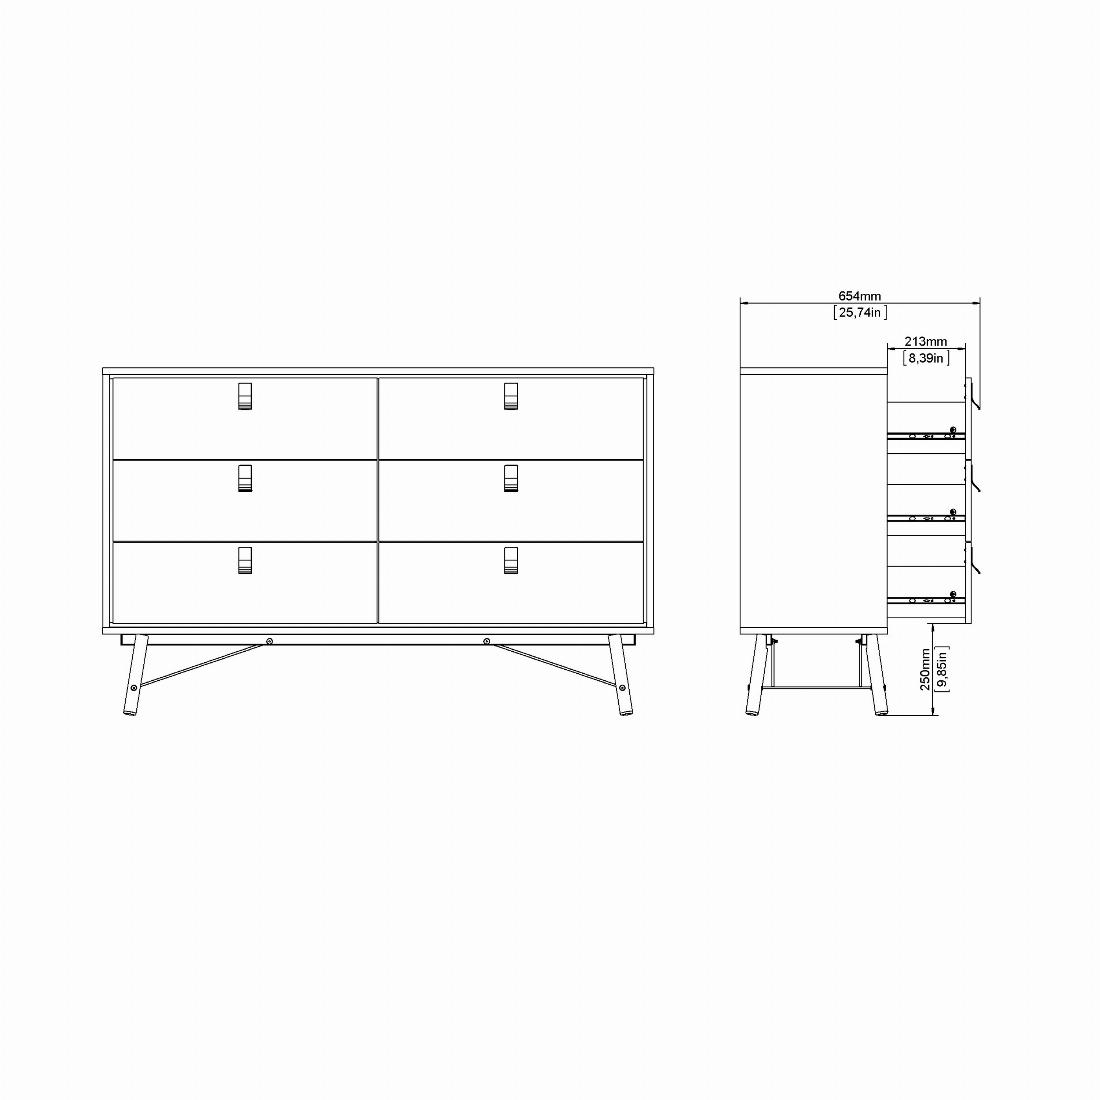 Ry Wide Double Chest of Drawers 6 Drawers in Jackson Hickory Oak